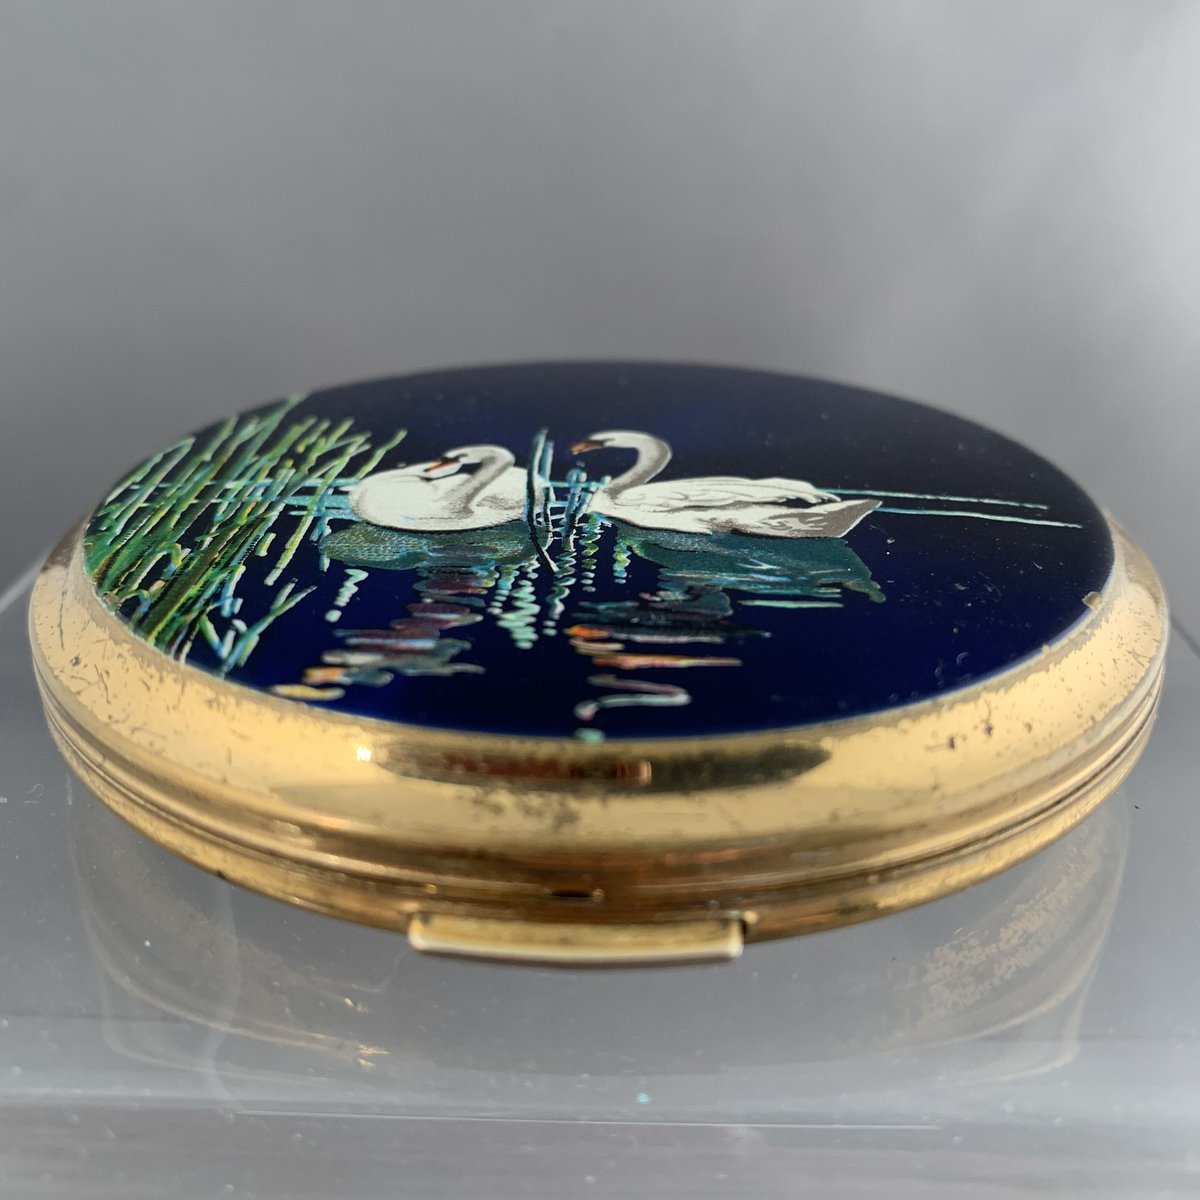 Next up: This beautiful ornate compact, decorated with two swans on lake.Give it a like or comment ‘Museum’ if you believe it’s part of our accessioned collection